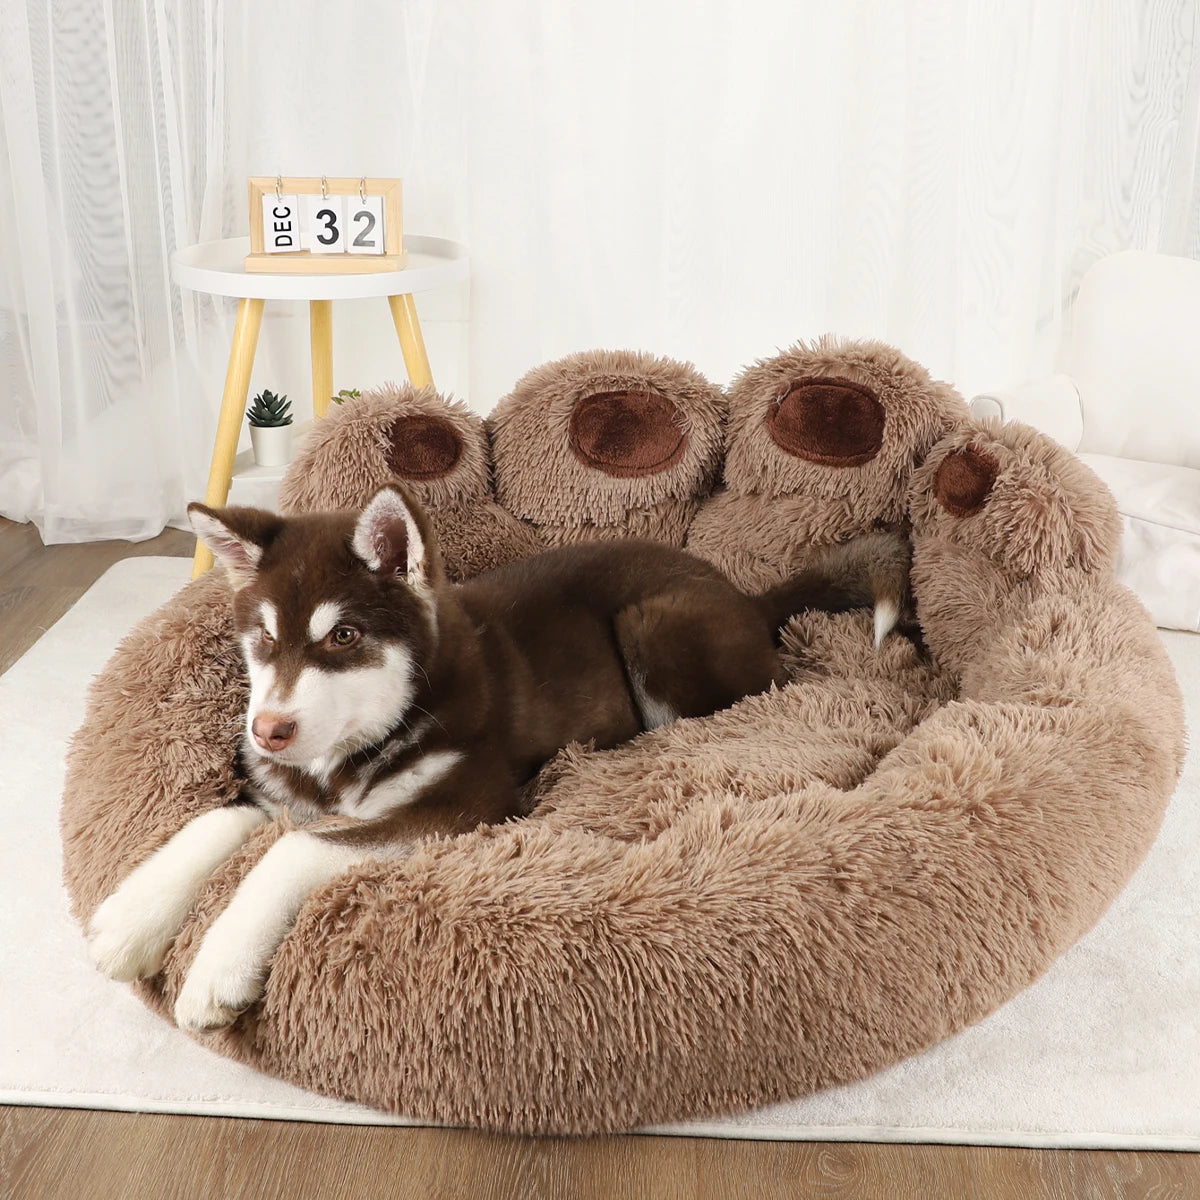 Pet Dog Sofa Beds for Small Dogs Warm